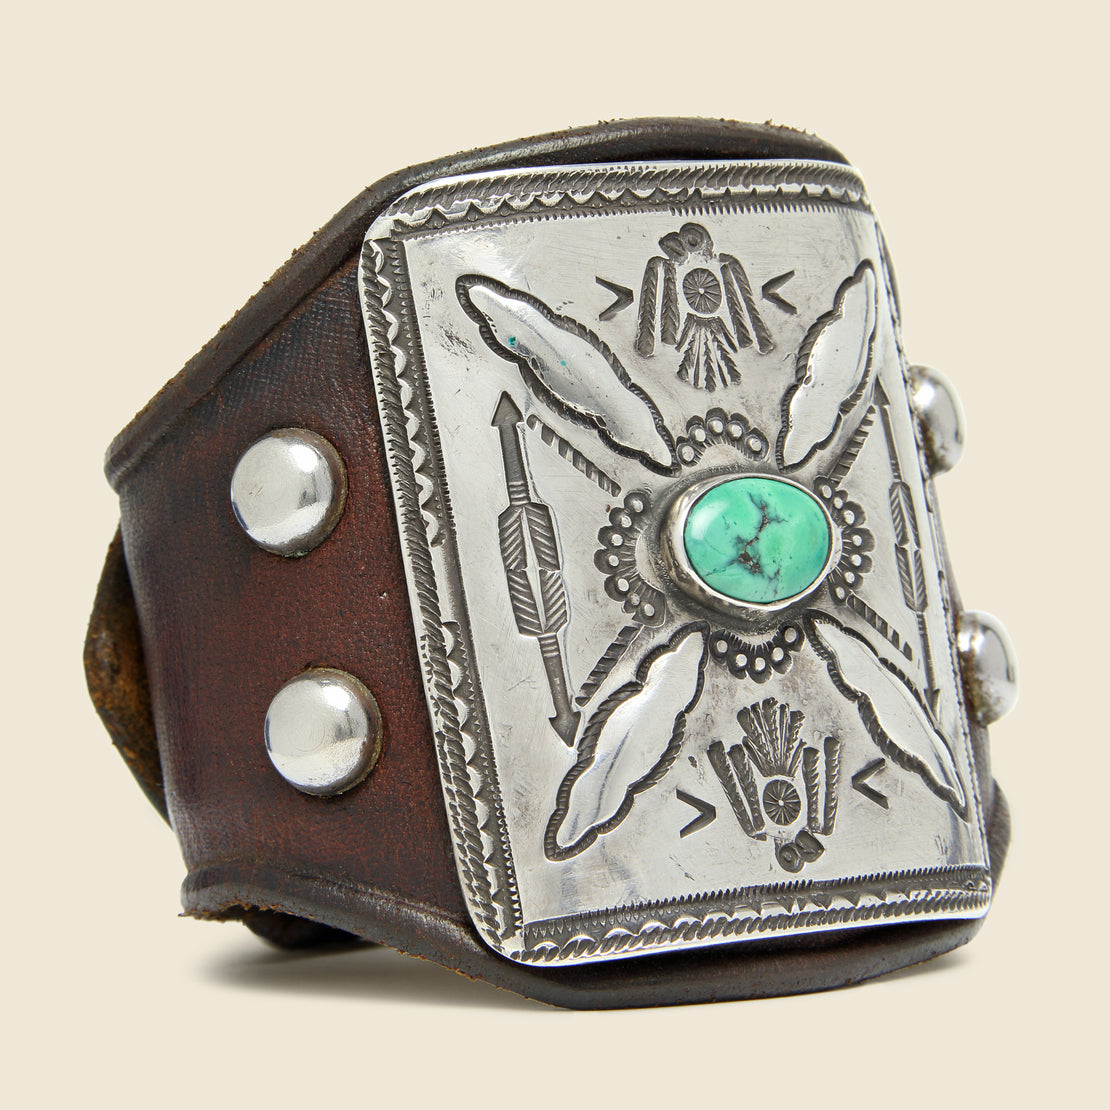 Smith Bros. Trading Co. Double Thunderbird Motif Ketoh - Leather/Sterling/Turquoise